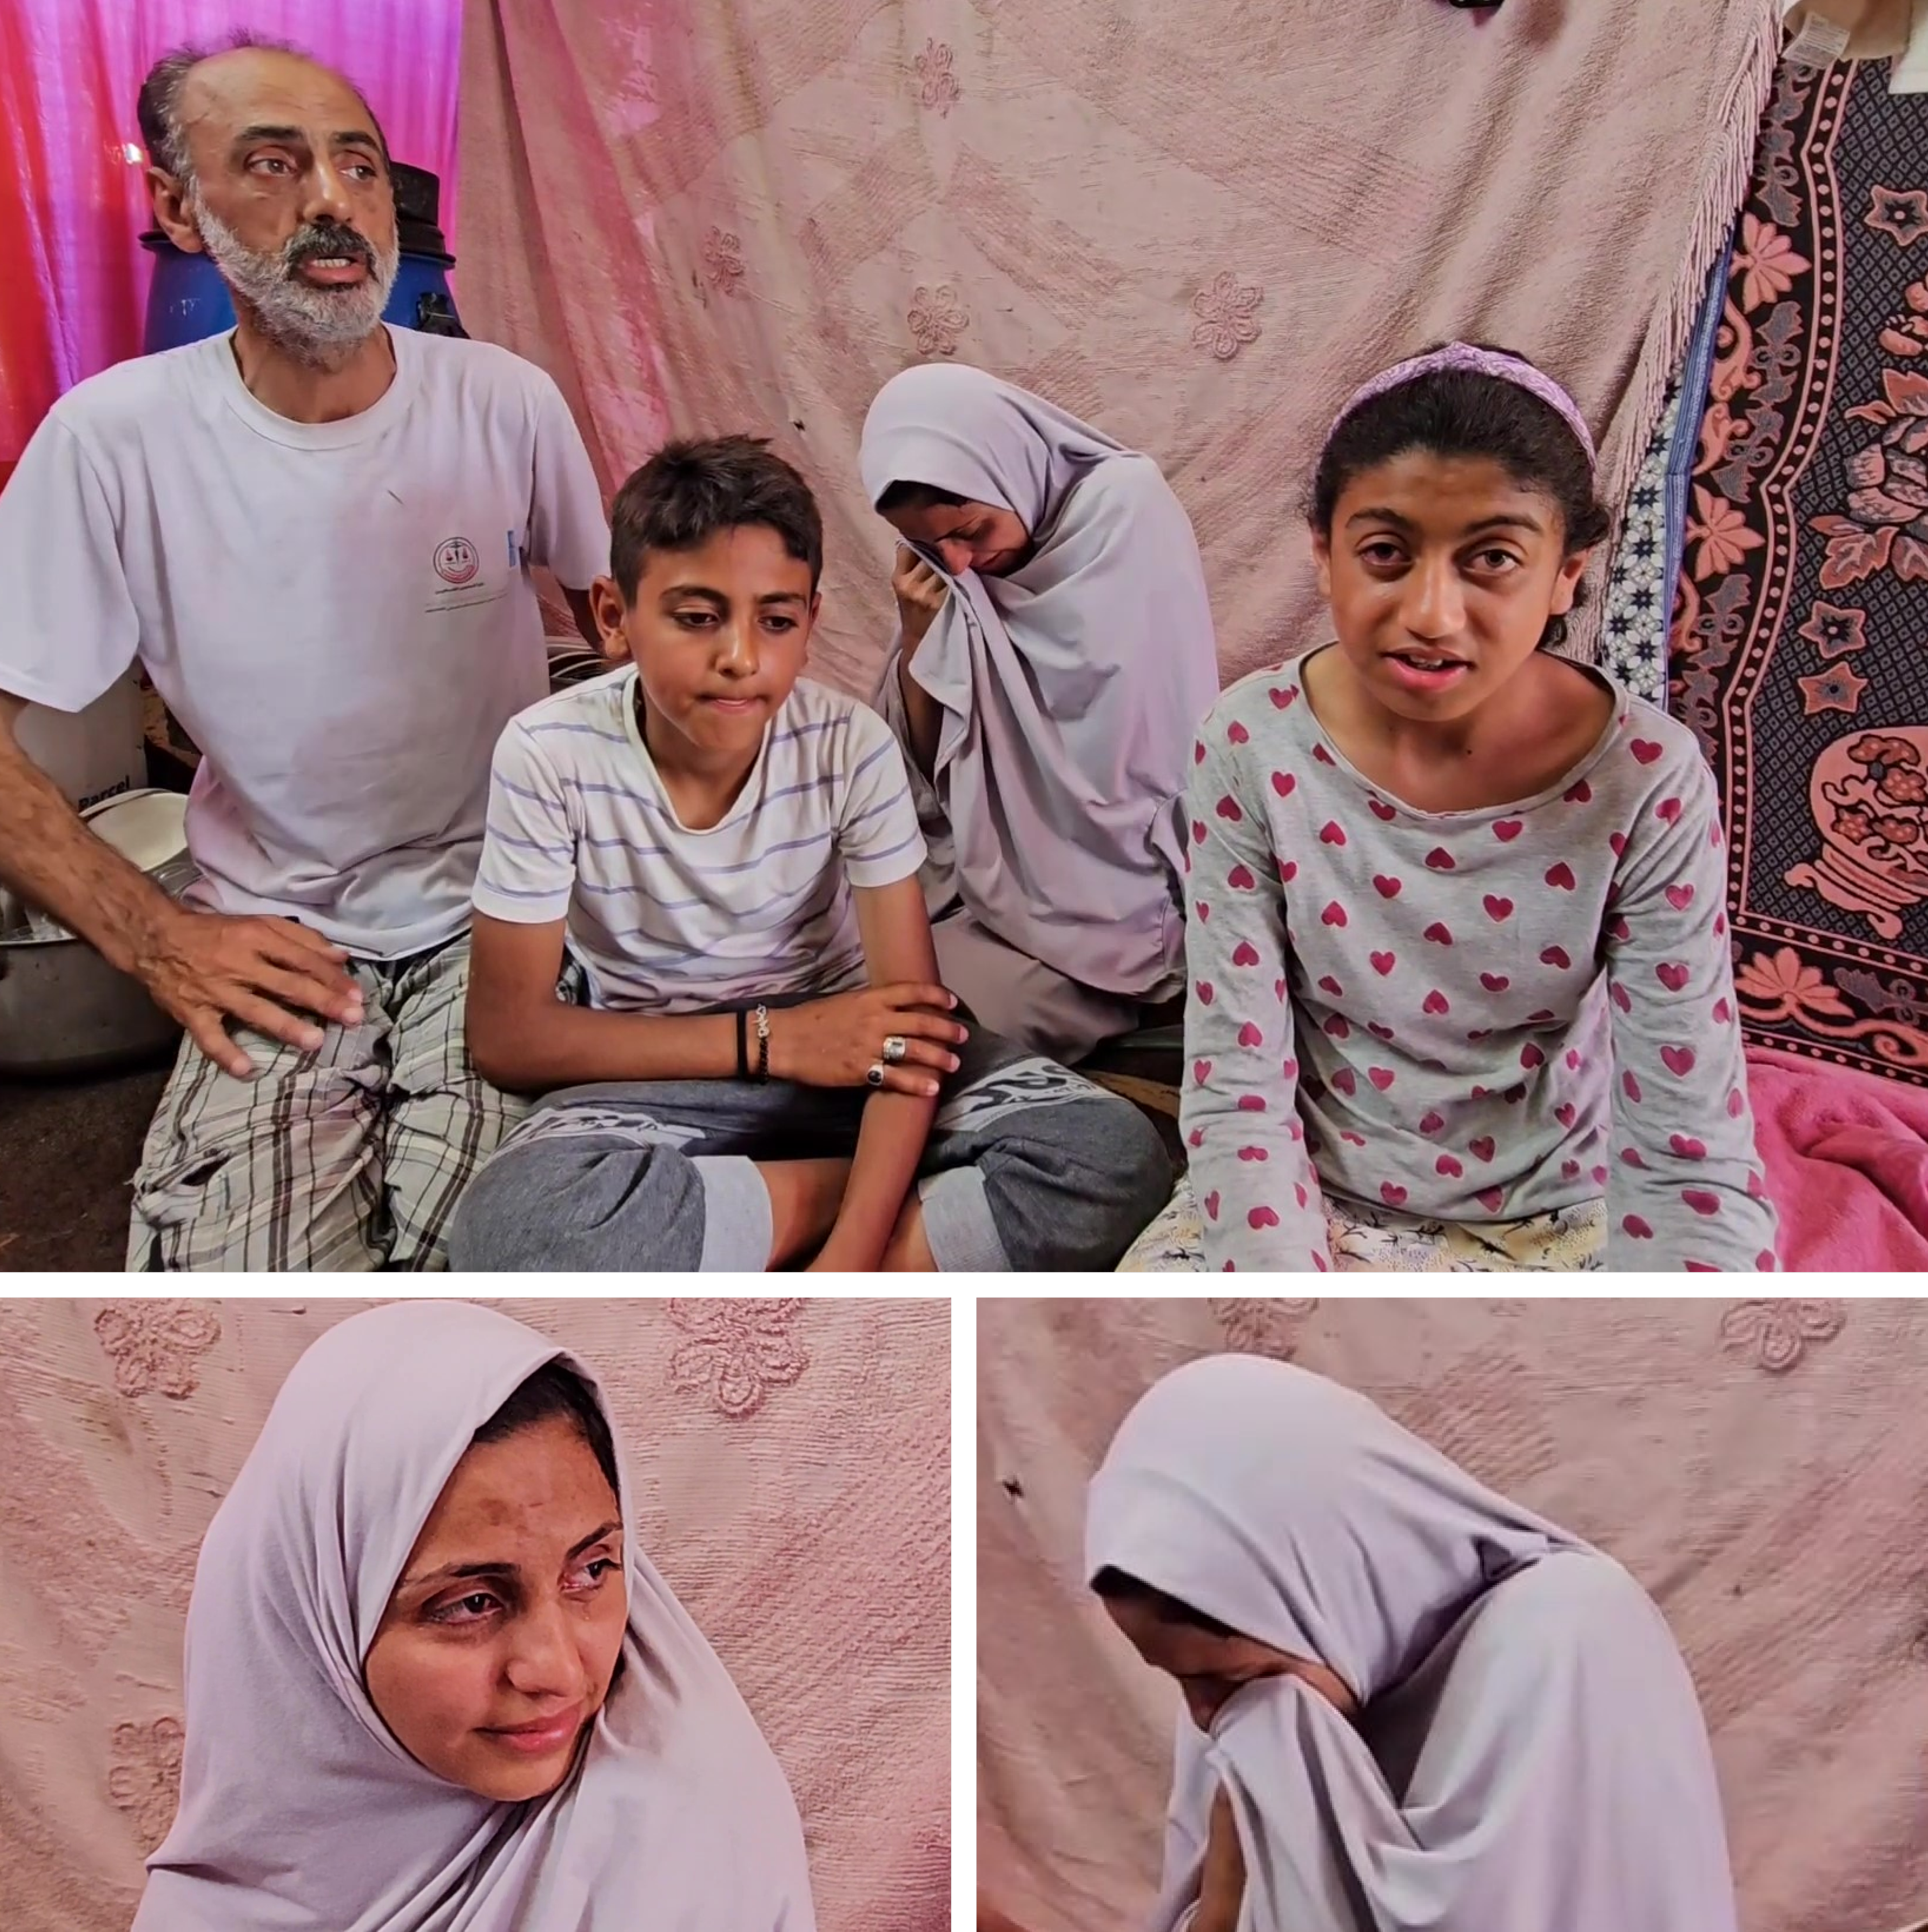 A grid of photos showing a woman wearing a white hijab crying while surrounded by children